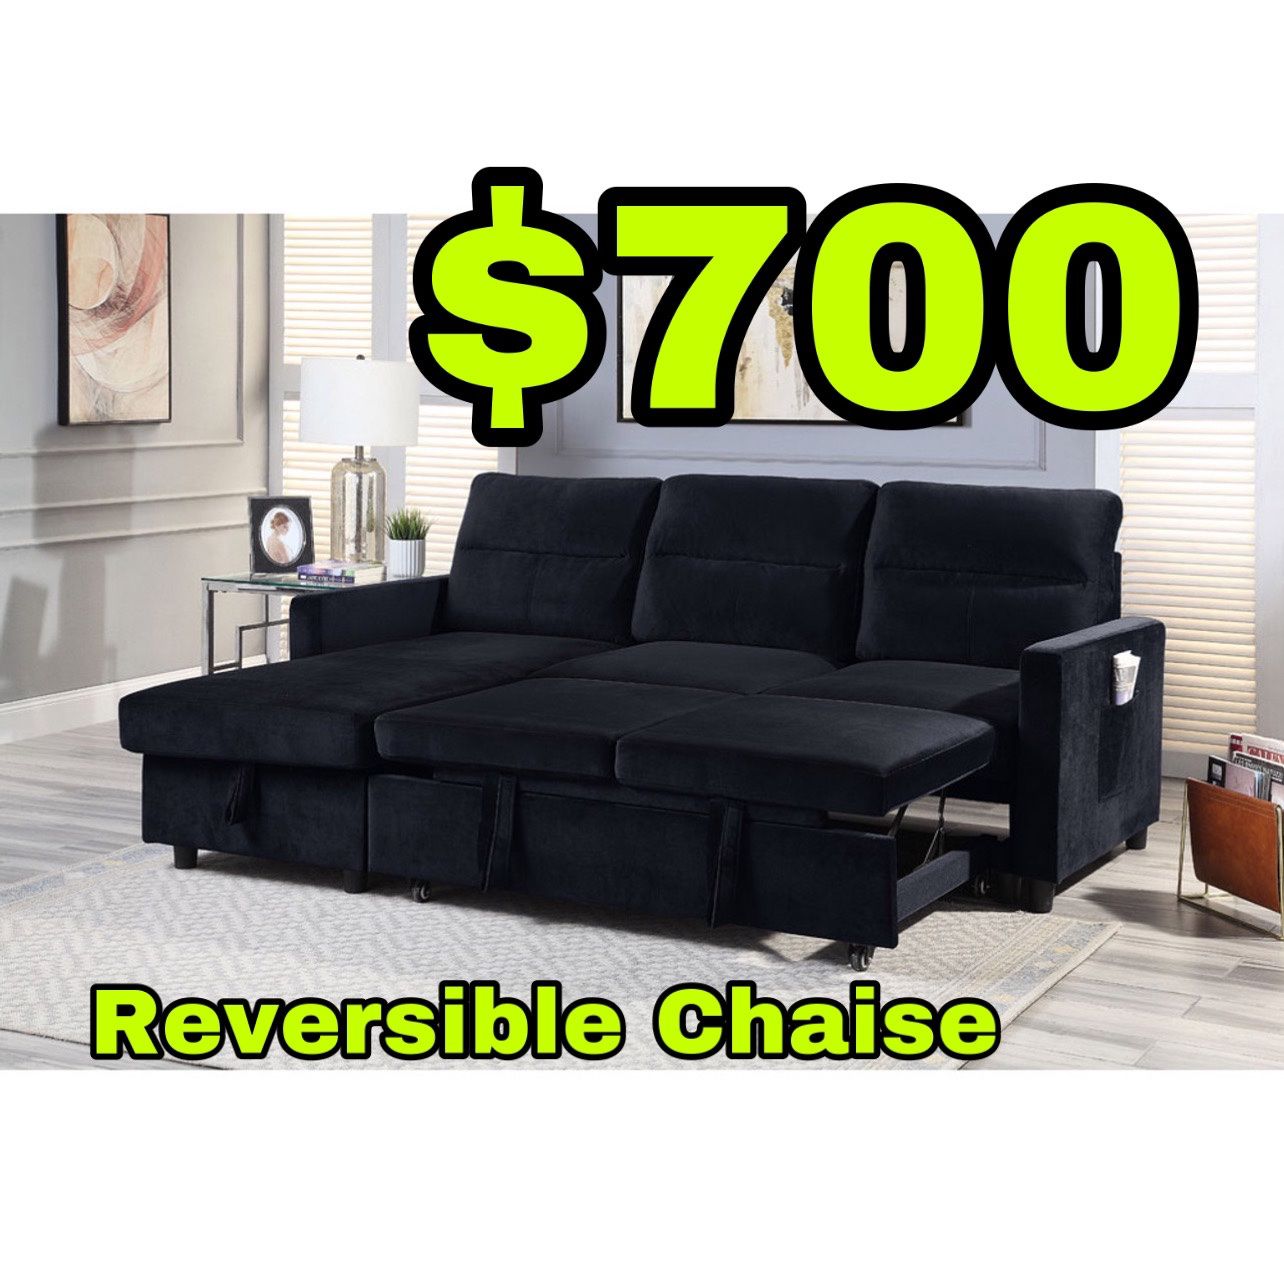 Beautiful New Sectional Sofa Bed W/ Reversible Storage Chaise in Black Velvet Only $700!!!